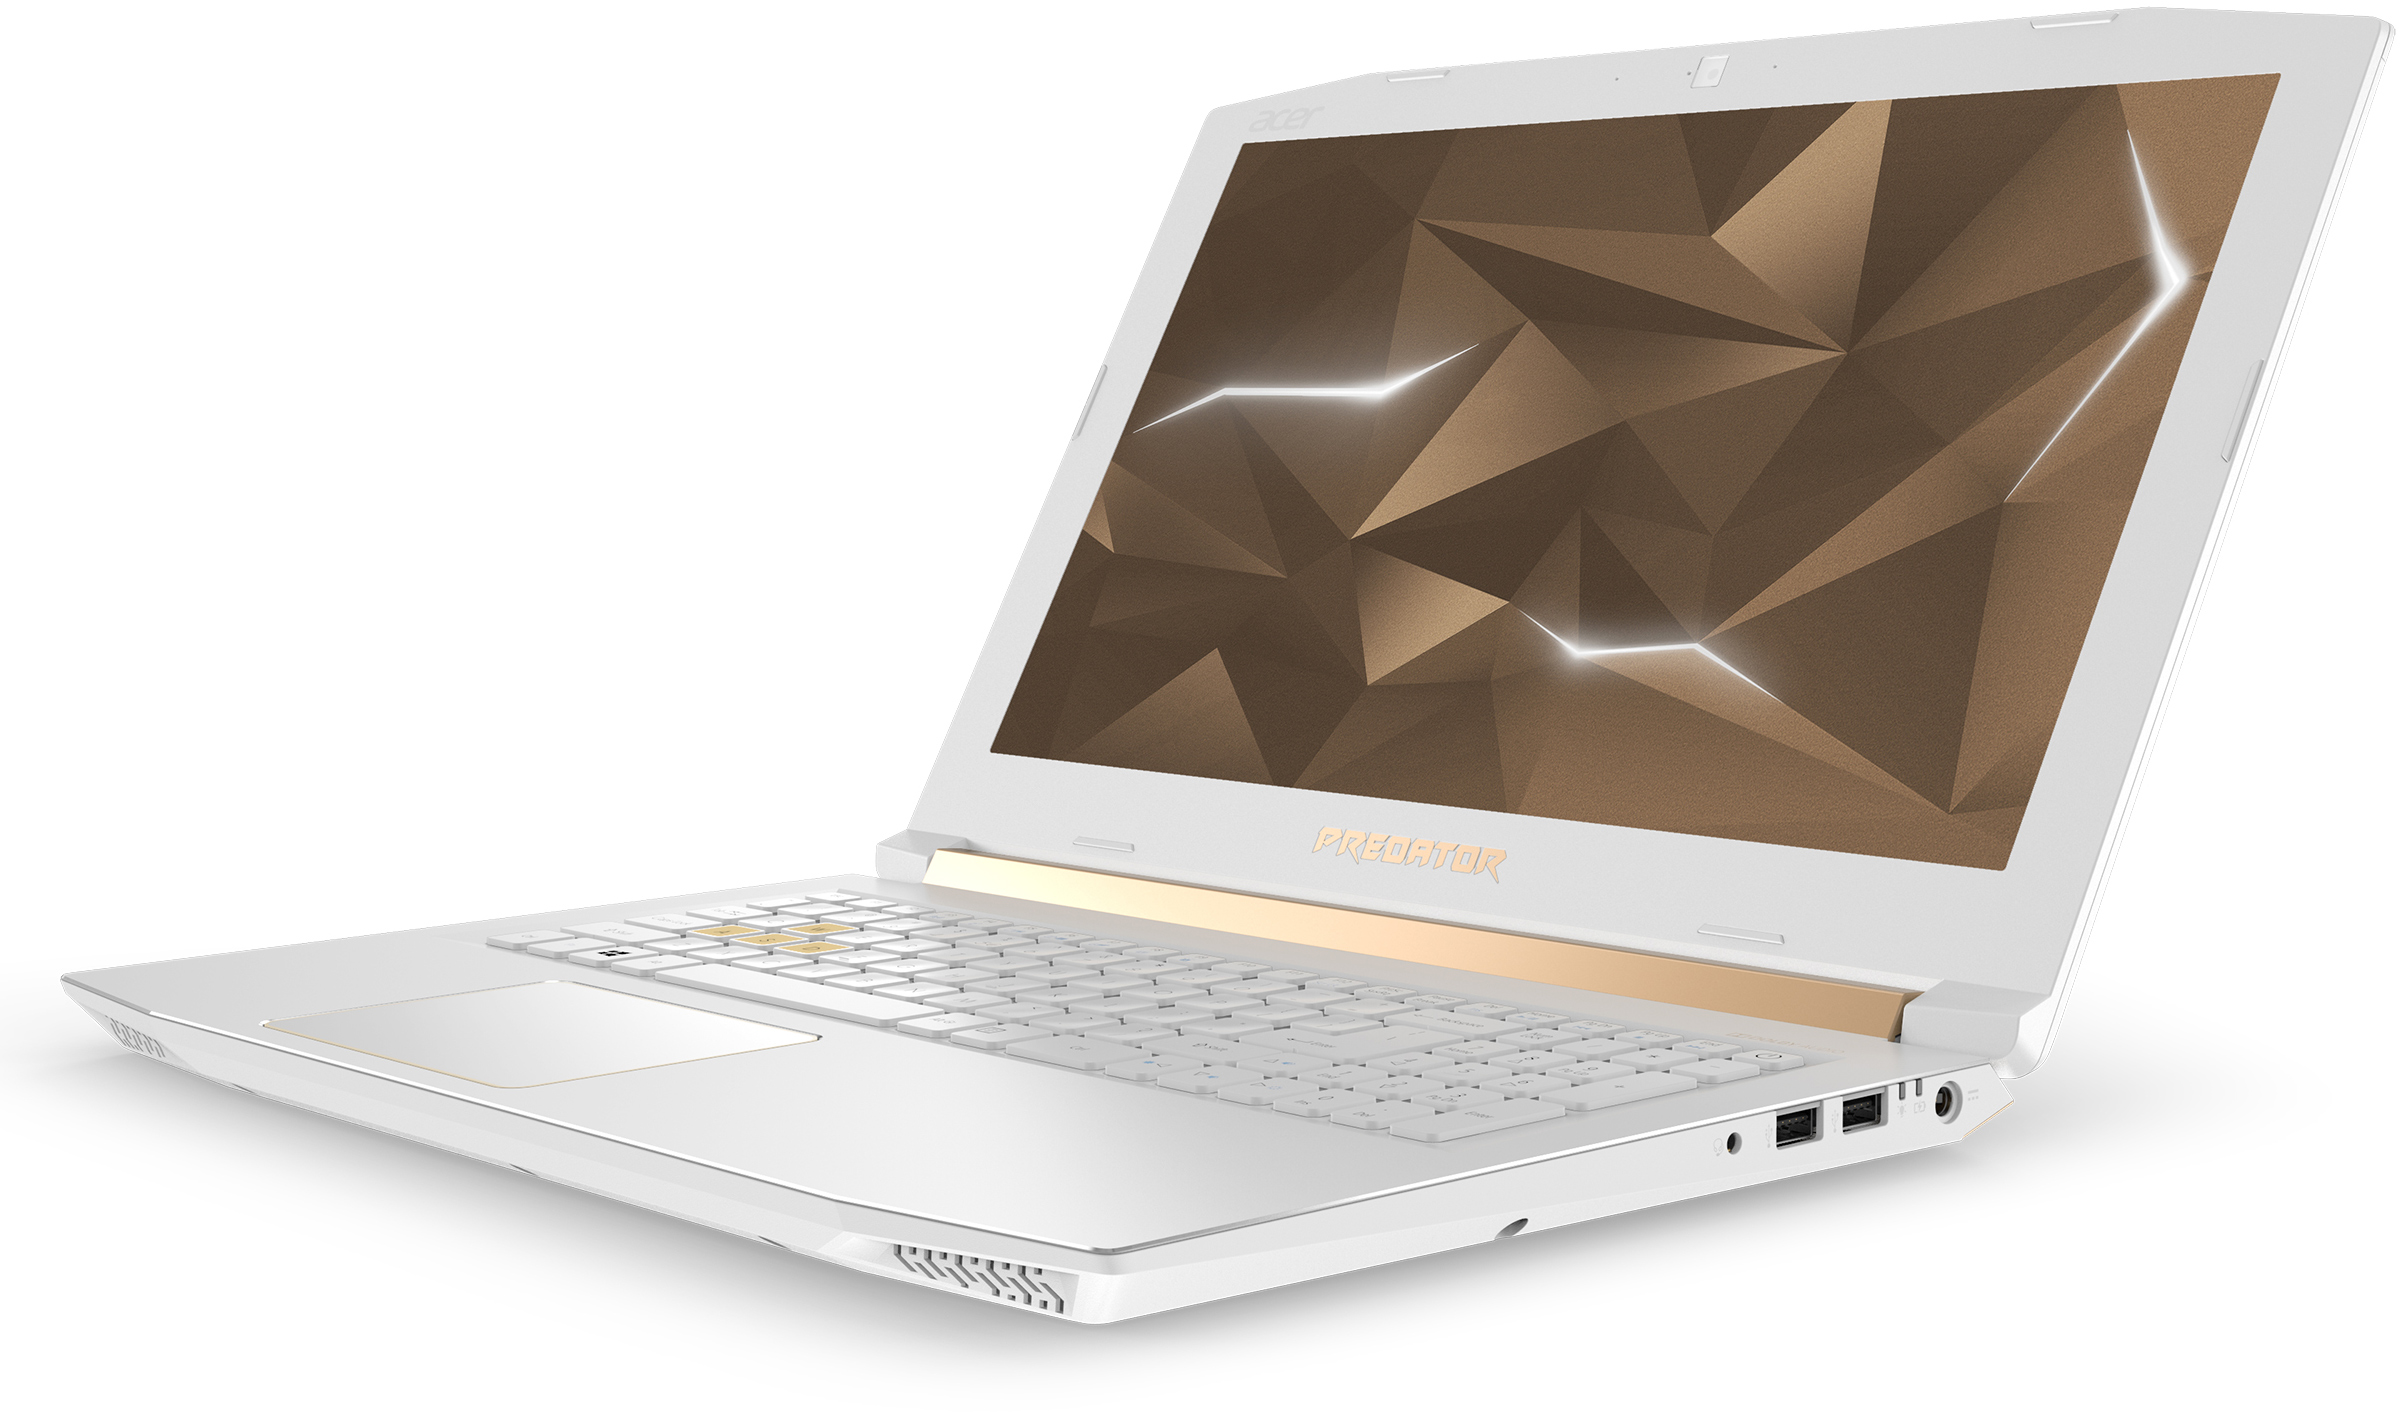 Acer Predator Helios 300 SE: White and Gold Gaming Laptop